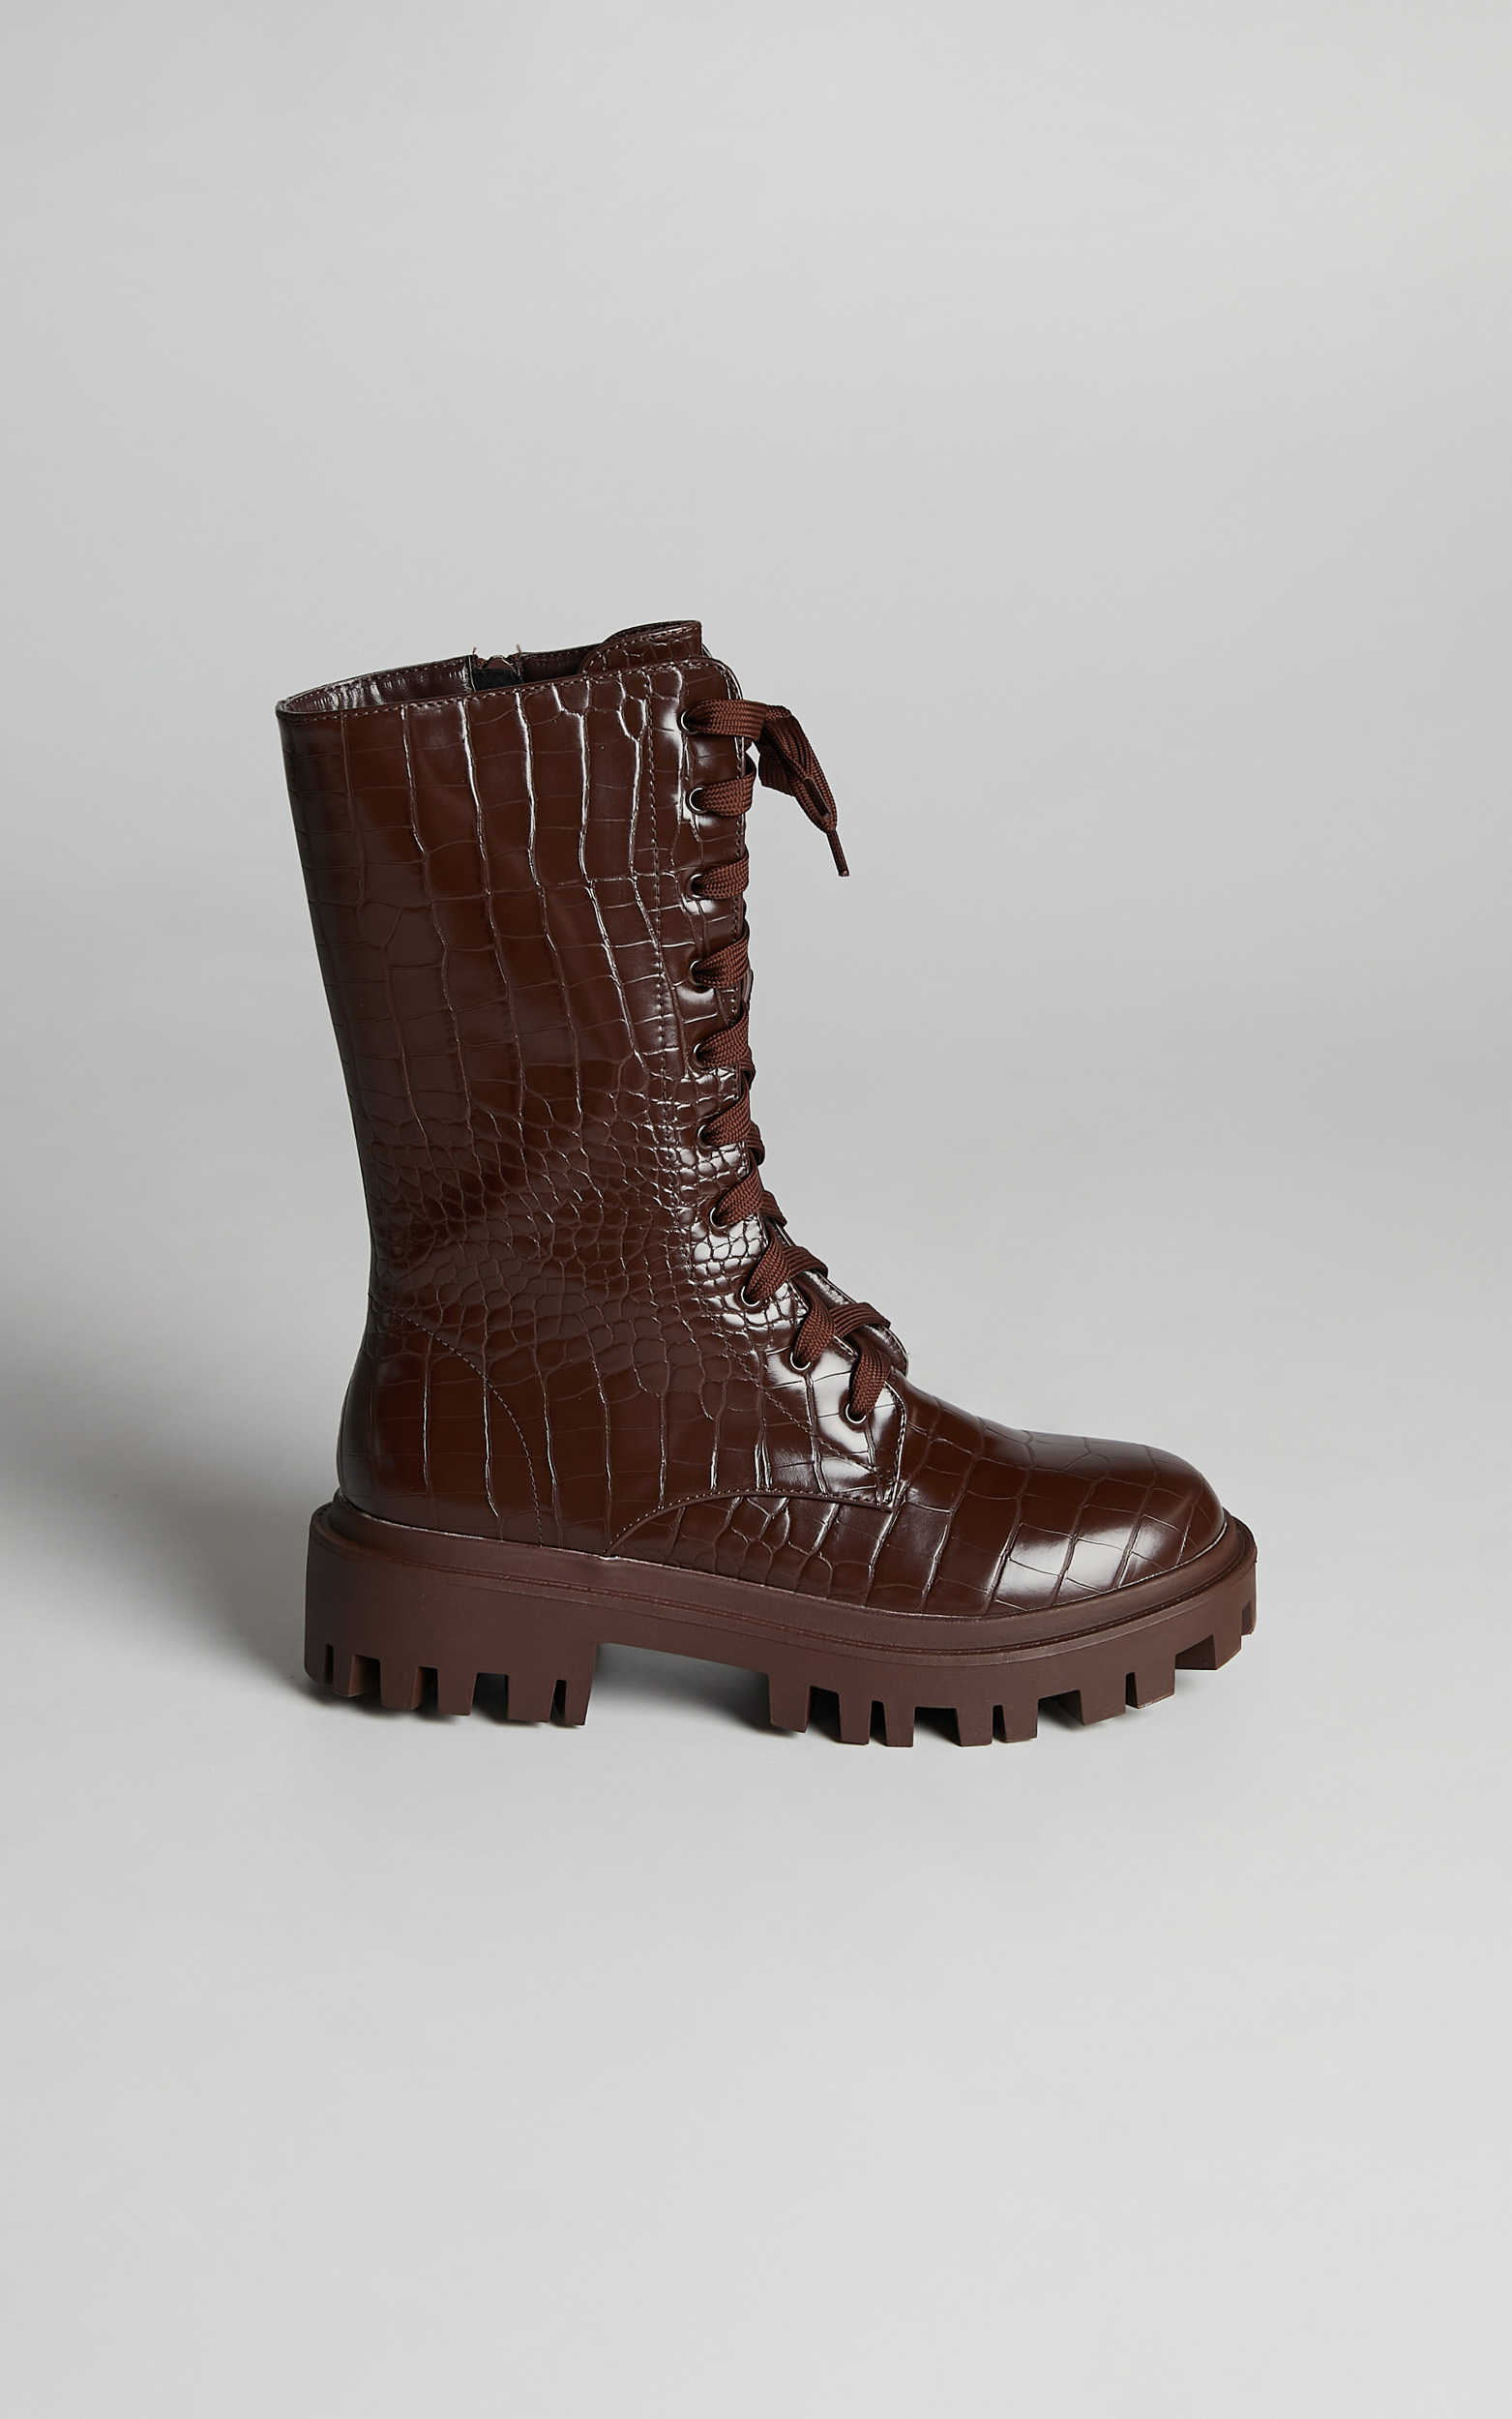 Public Desire - Beau Boots in Chocolate Croc - 05, BRN2, hi-res image number null